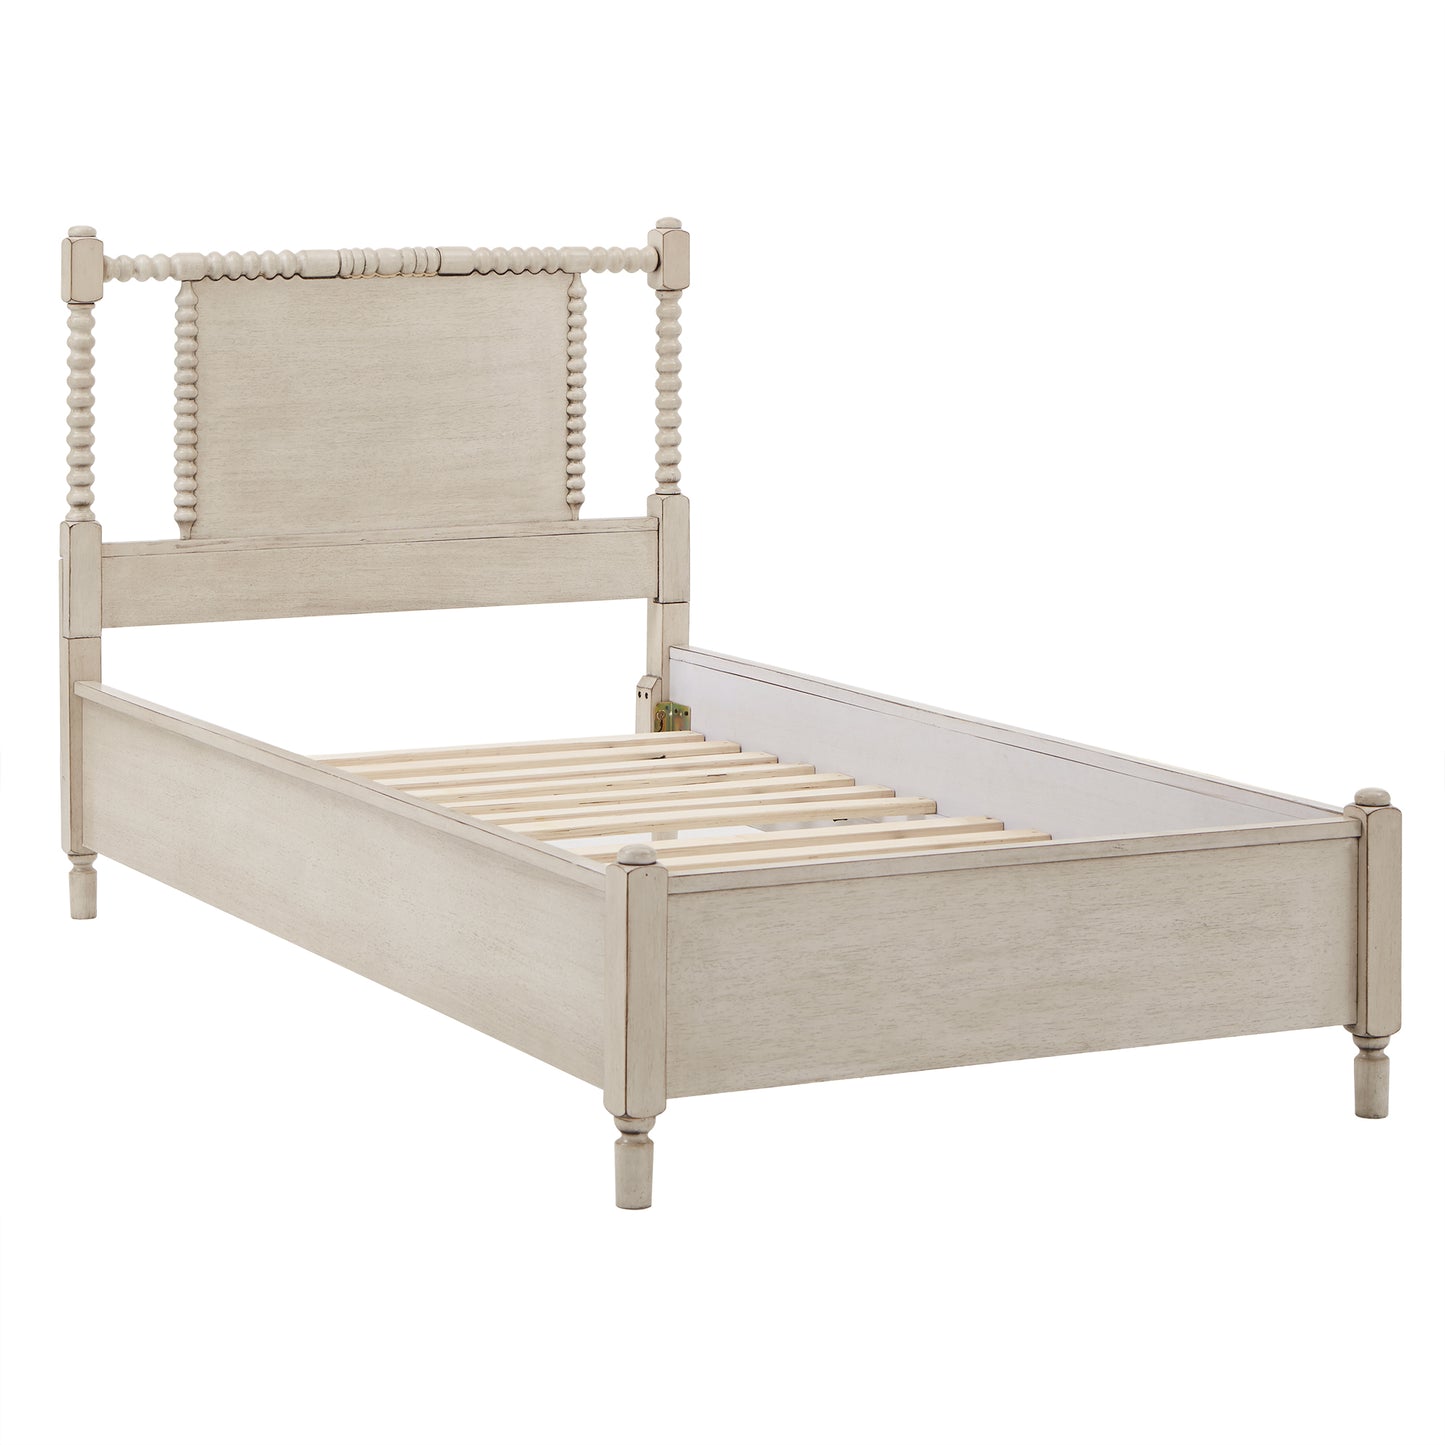 Antique Finish Beaded Wood Platform Bed - Antique White, Twin Size